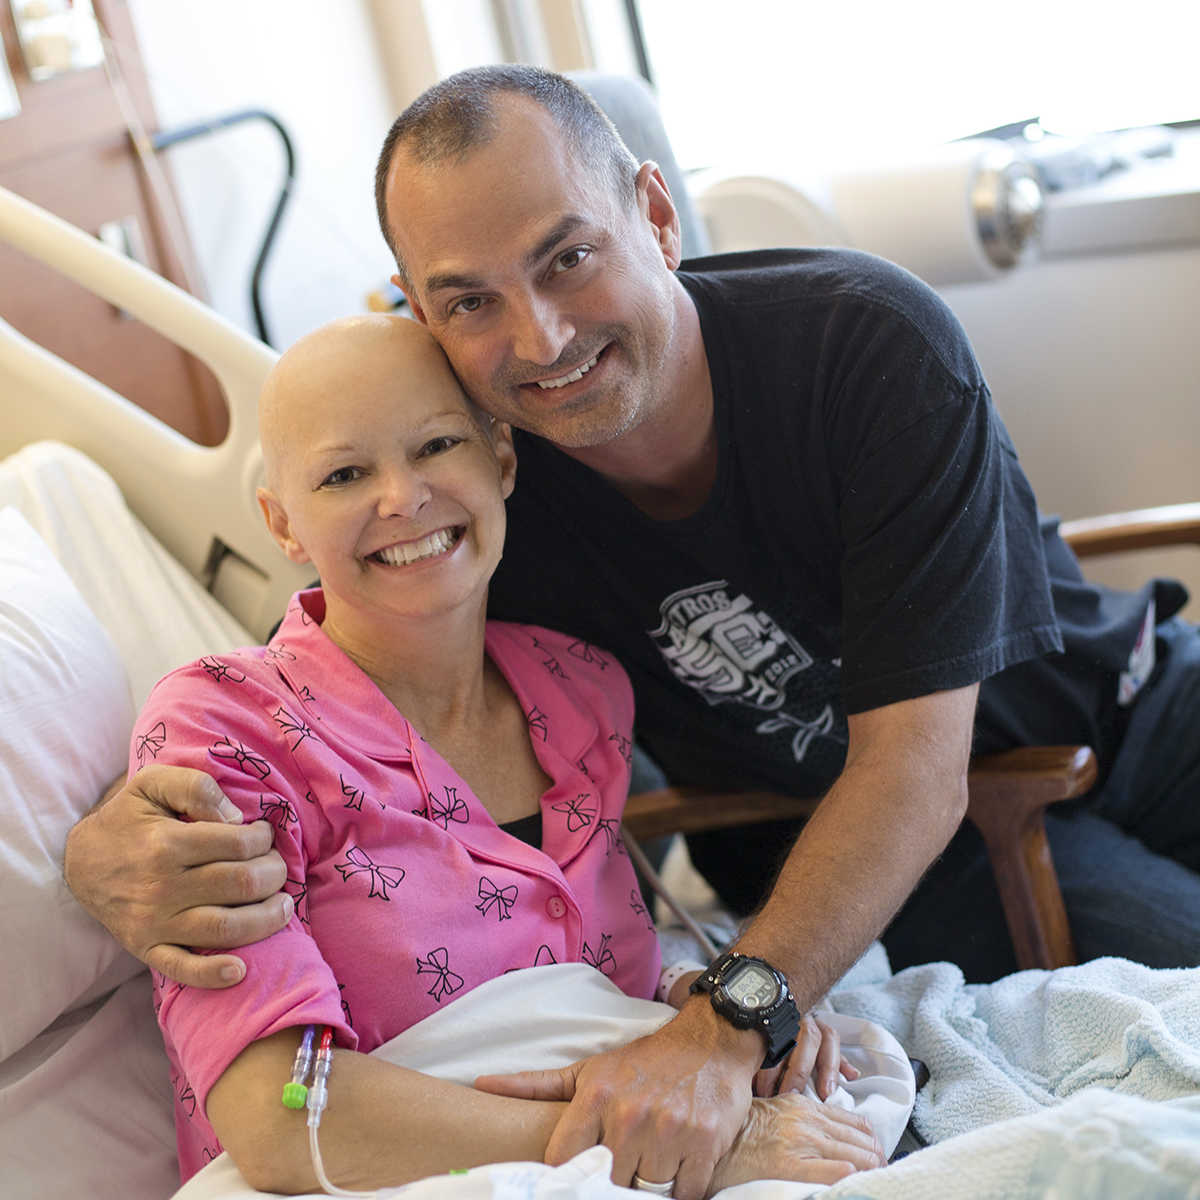 wife without hair sitting and smiling in hospital bed as husband has his arms around her smiling